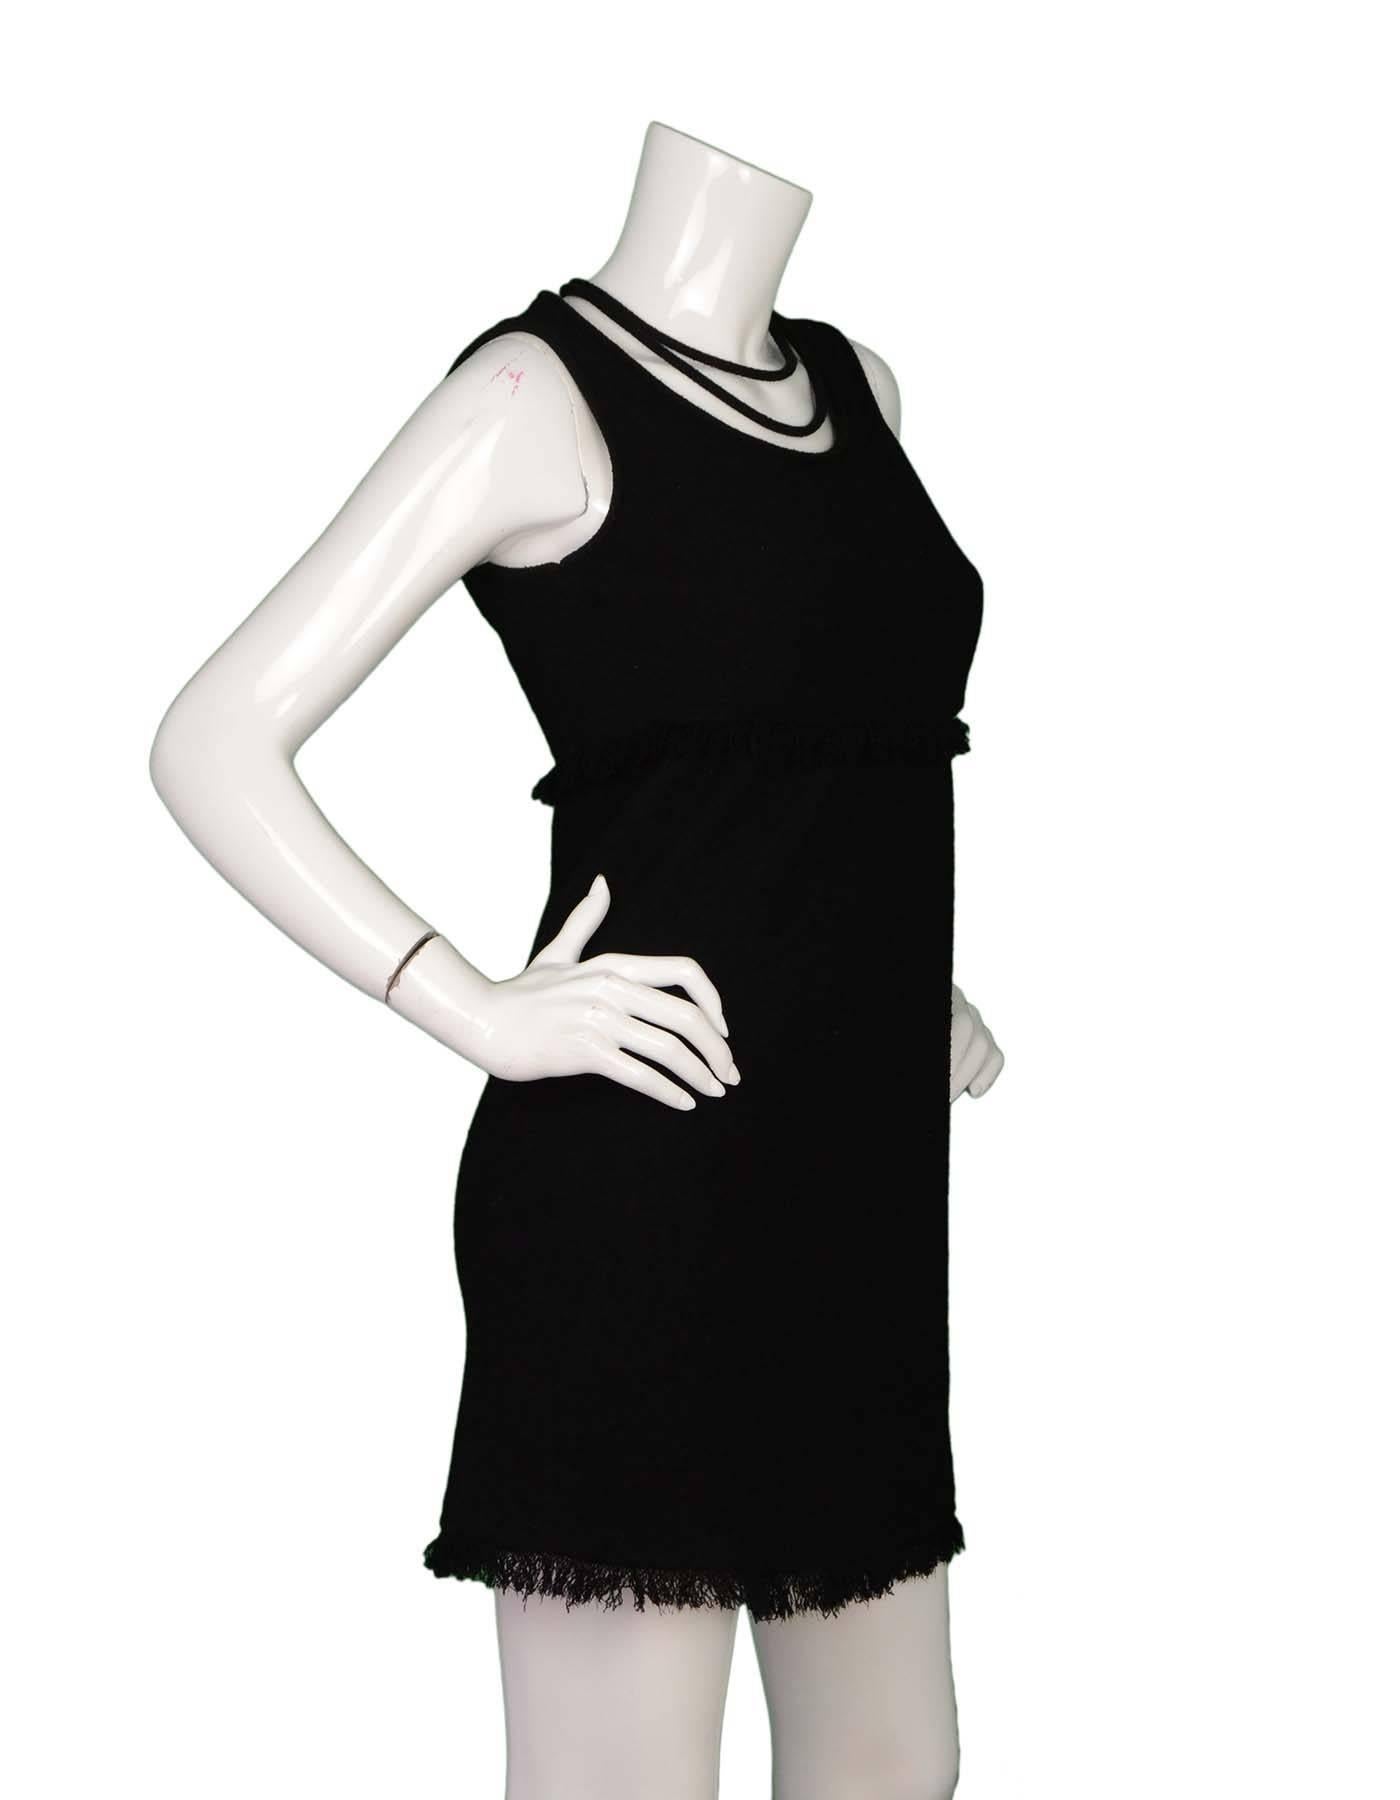 Chanel Black Wool Boucle Sleeveless Dress with Fringe  Sz 40
Features neckline detail and fringe trim

Made In: France
Year of Production: Recent collection
Color: Black
Composition: 85% Wool, 15% Nylon
Lining: Black silk